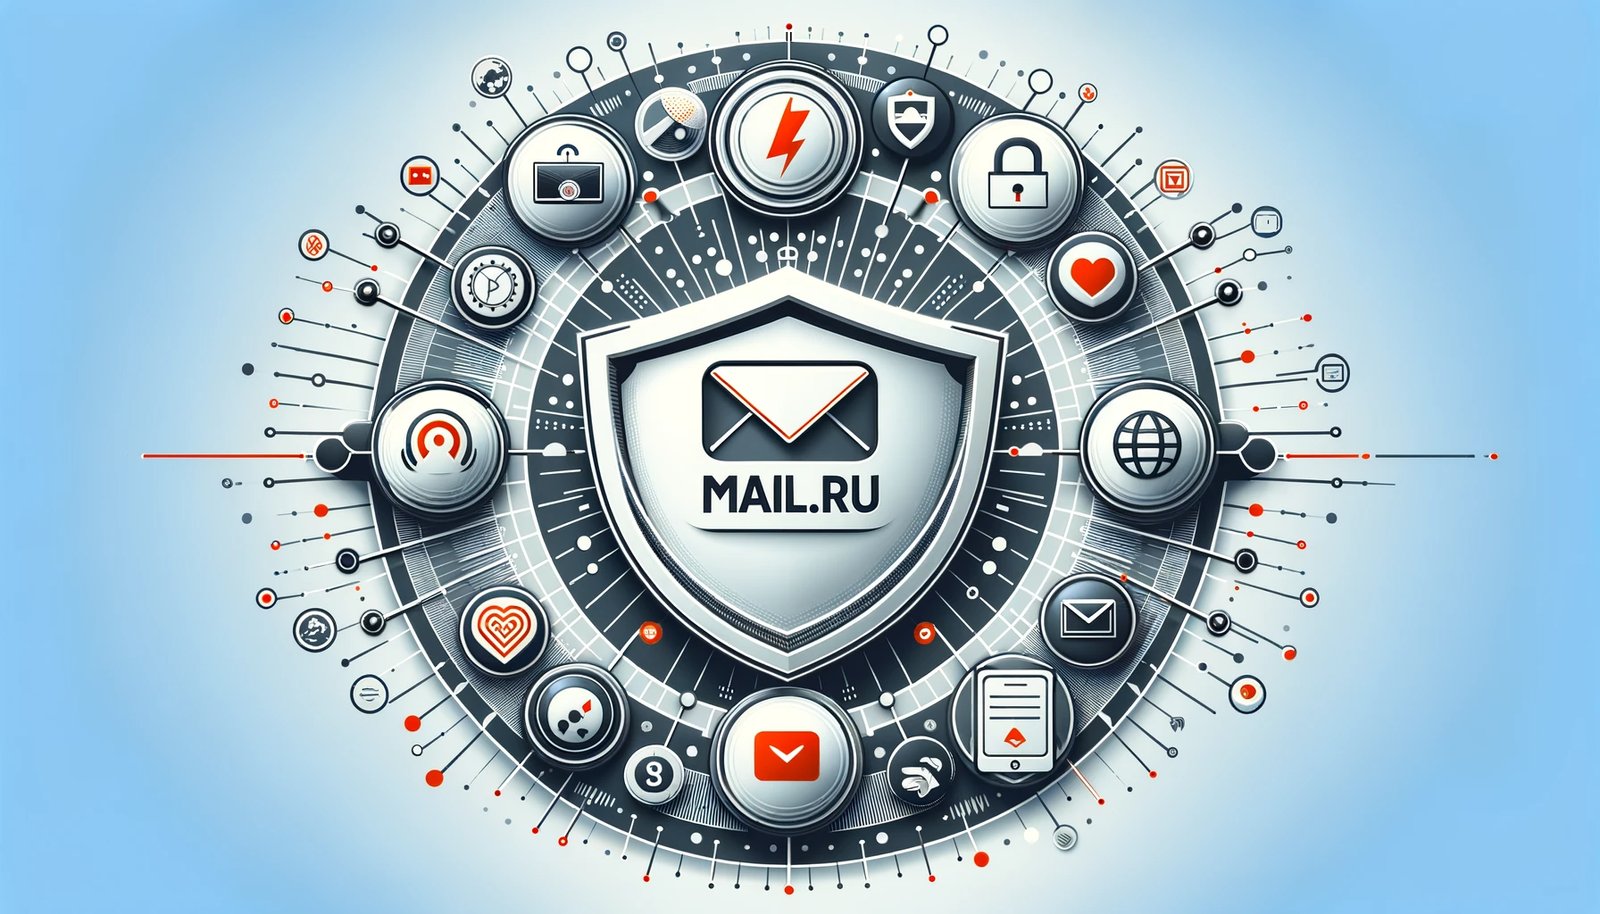 What are the Benefits of Having a Mail.ru Account